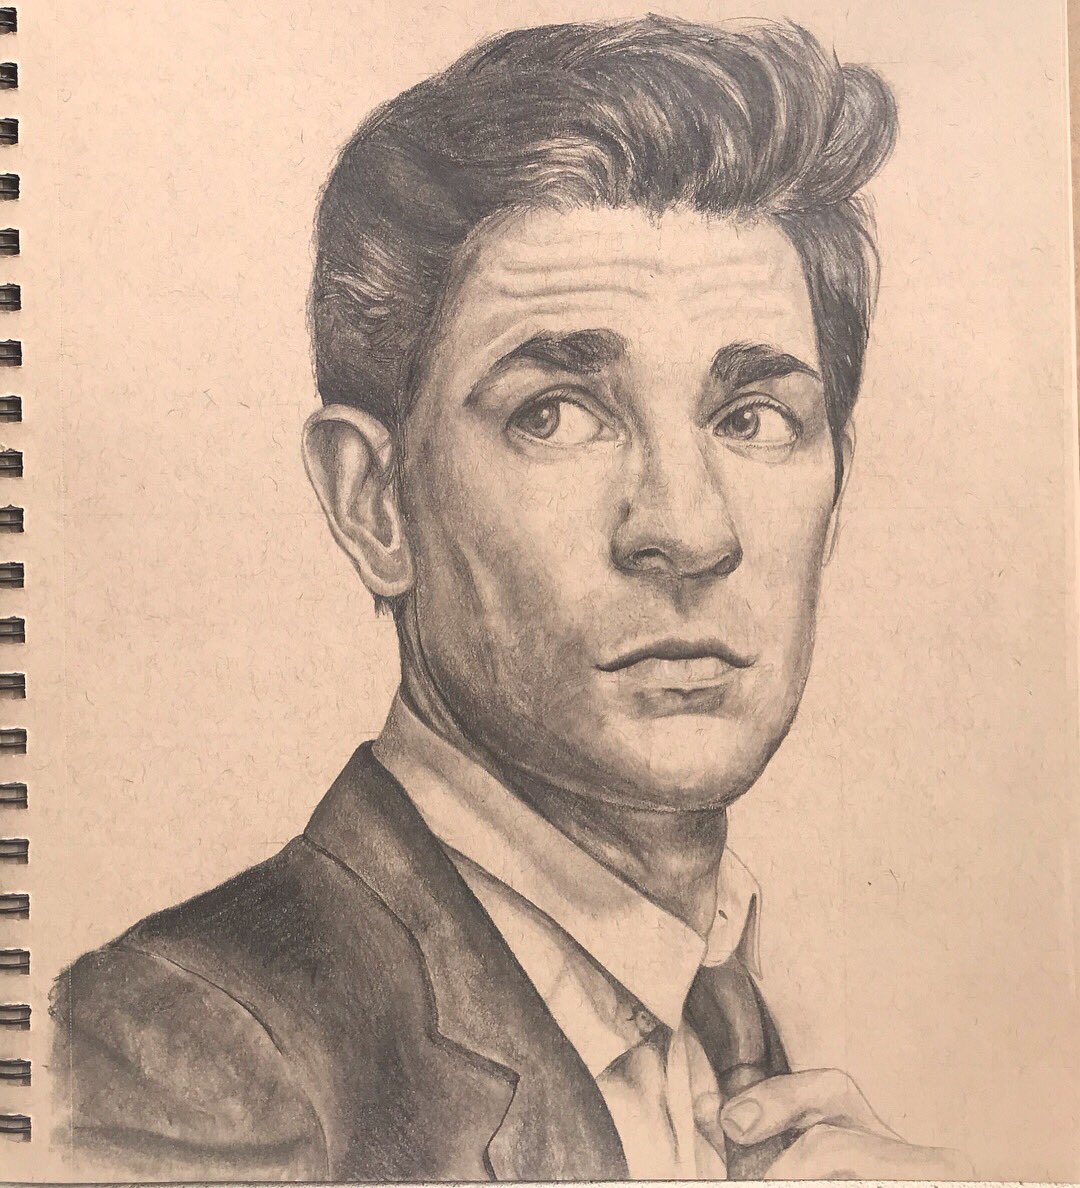 Finally able to post this drawing! I am very happy to share this drawing of @johnkrasinski that I did for my friends birthday, who’s a huge fan of Jim in the Office!

#TheOffice #jimhalpert #johnkrasinski #drawing #art #pencildrawing  #jimandpam #jimhalpertedit  #pencildrawing